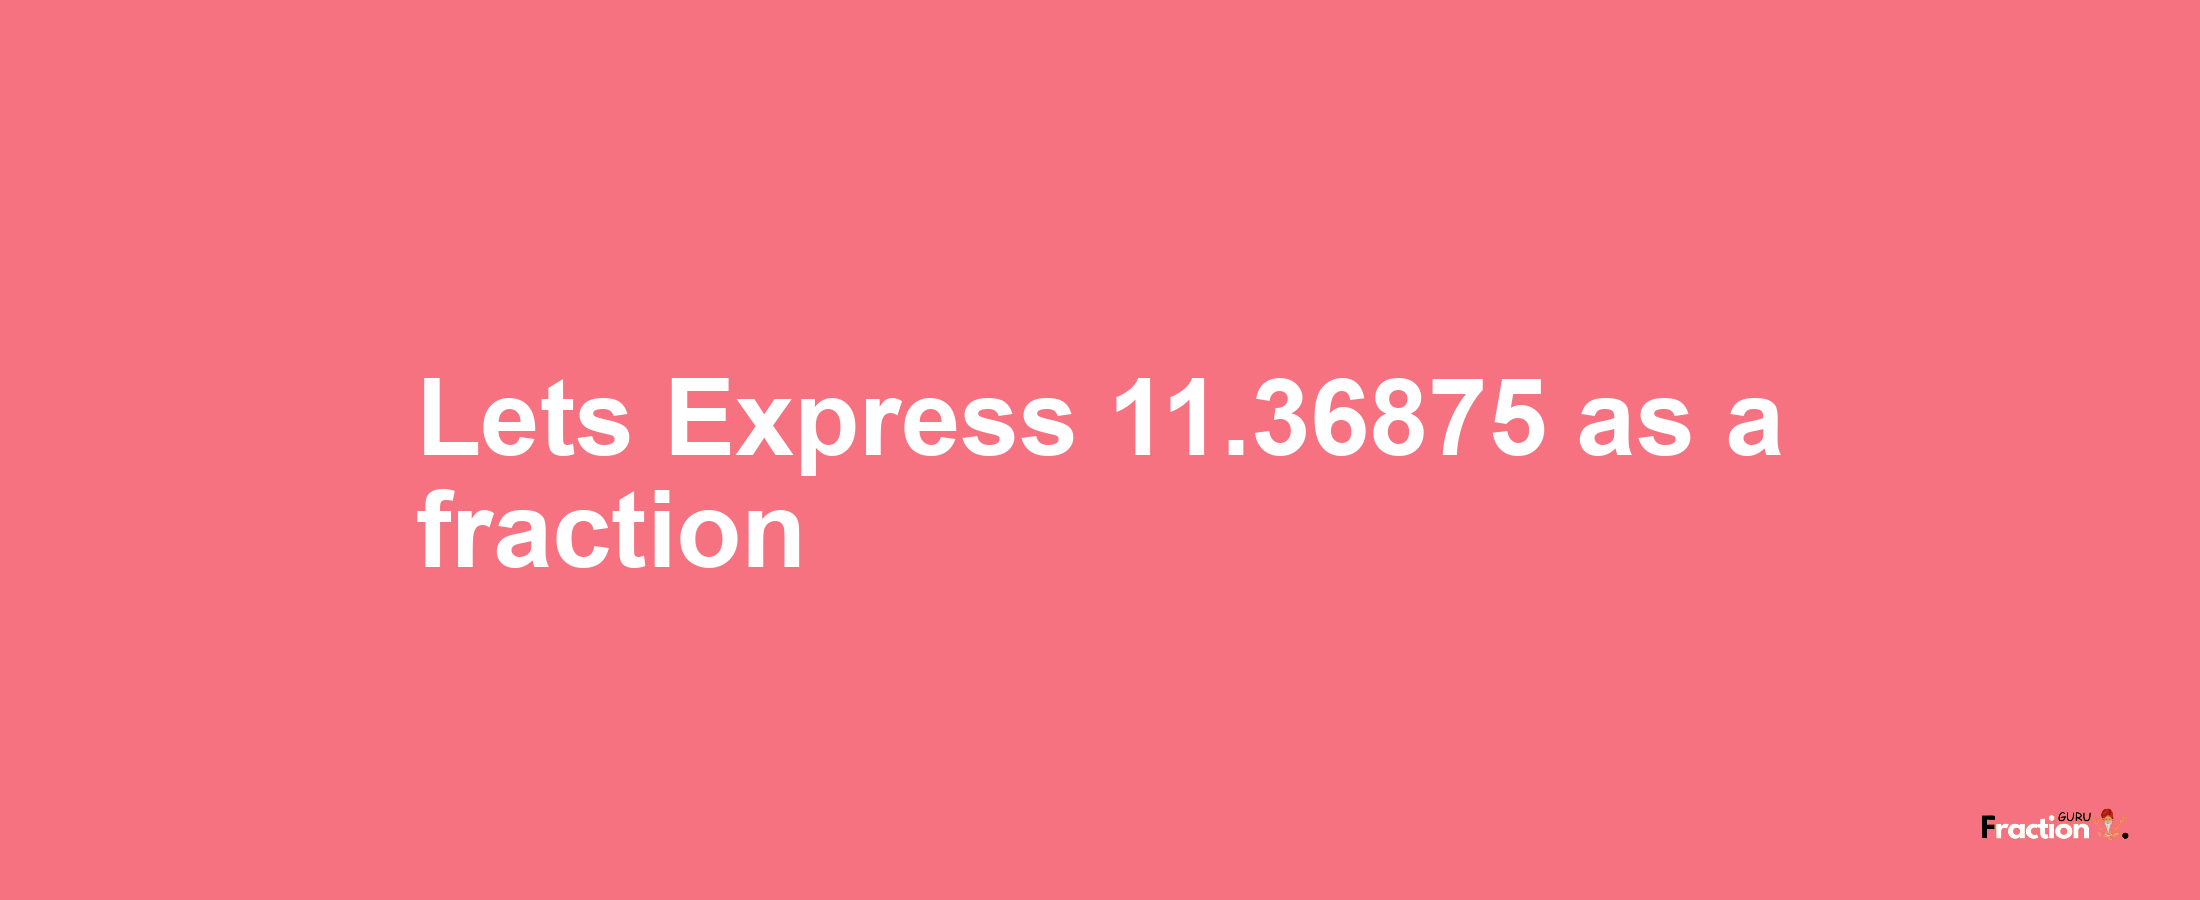 Lets Express 11.36875 as afraction